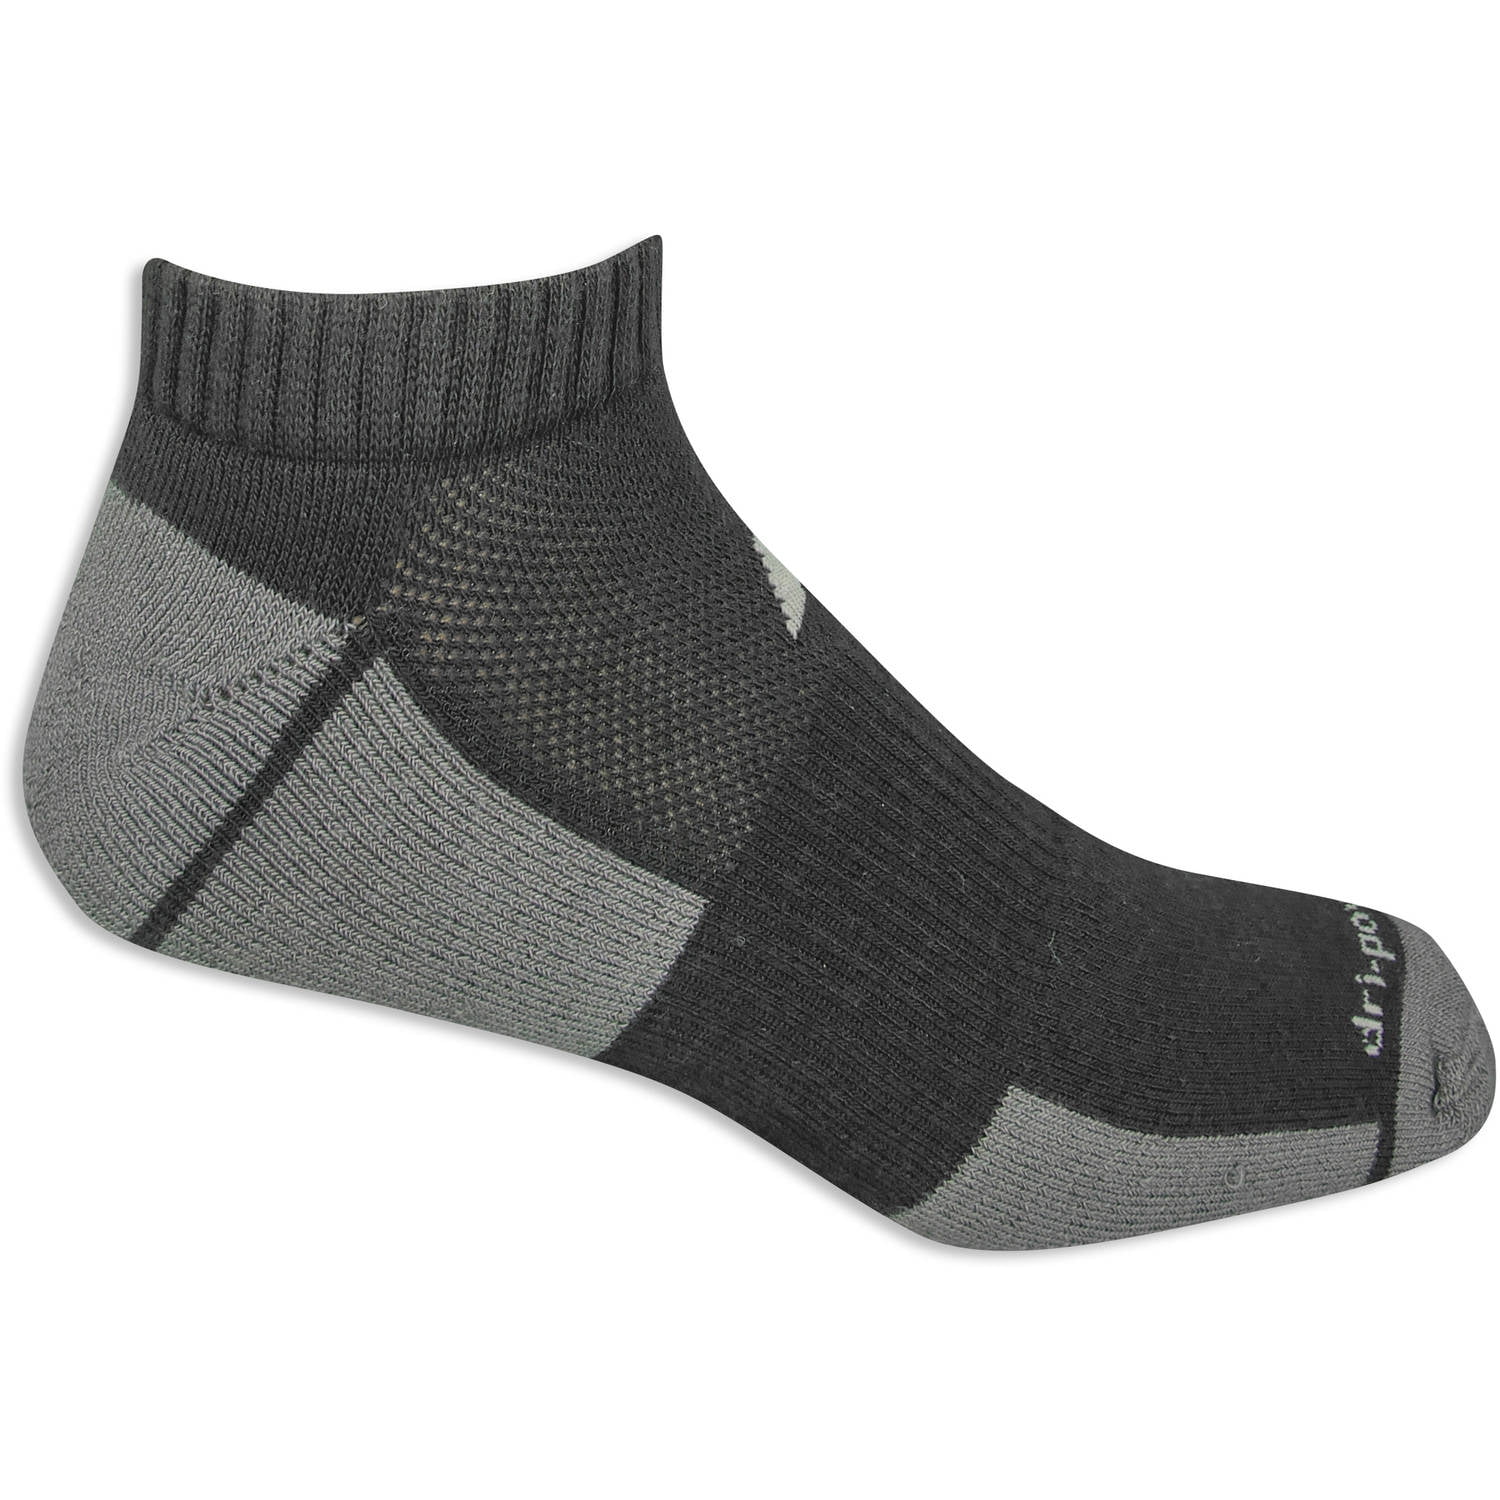 Shoe Size Russell Men's Work To Workout No Show Socks Black Assorted 6-12